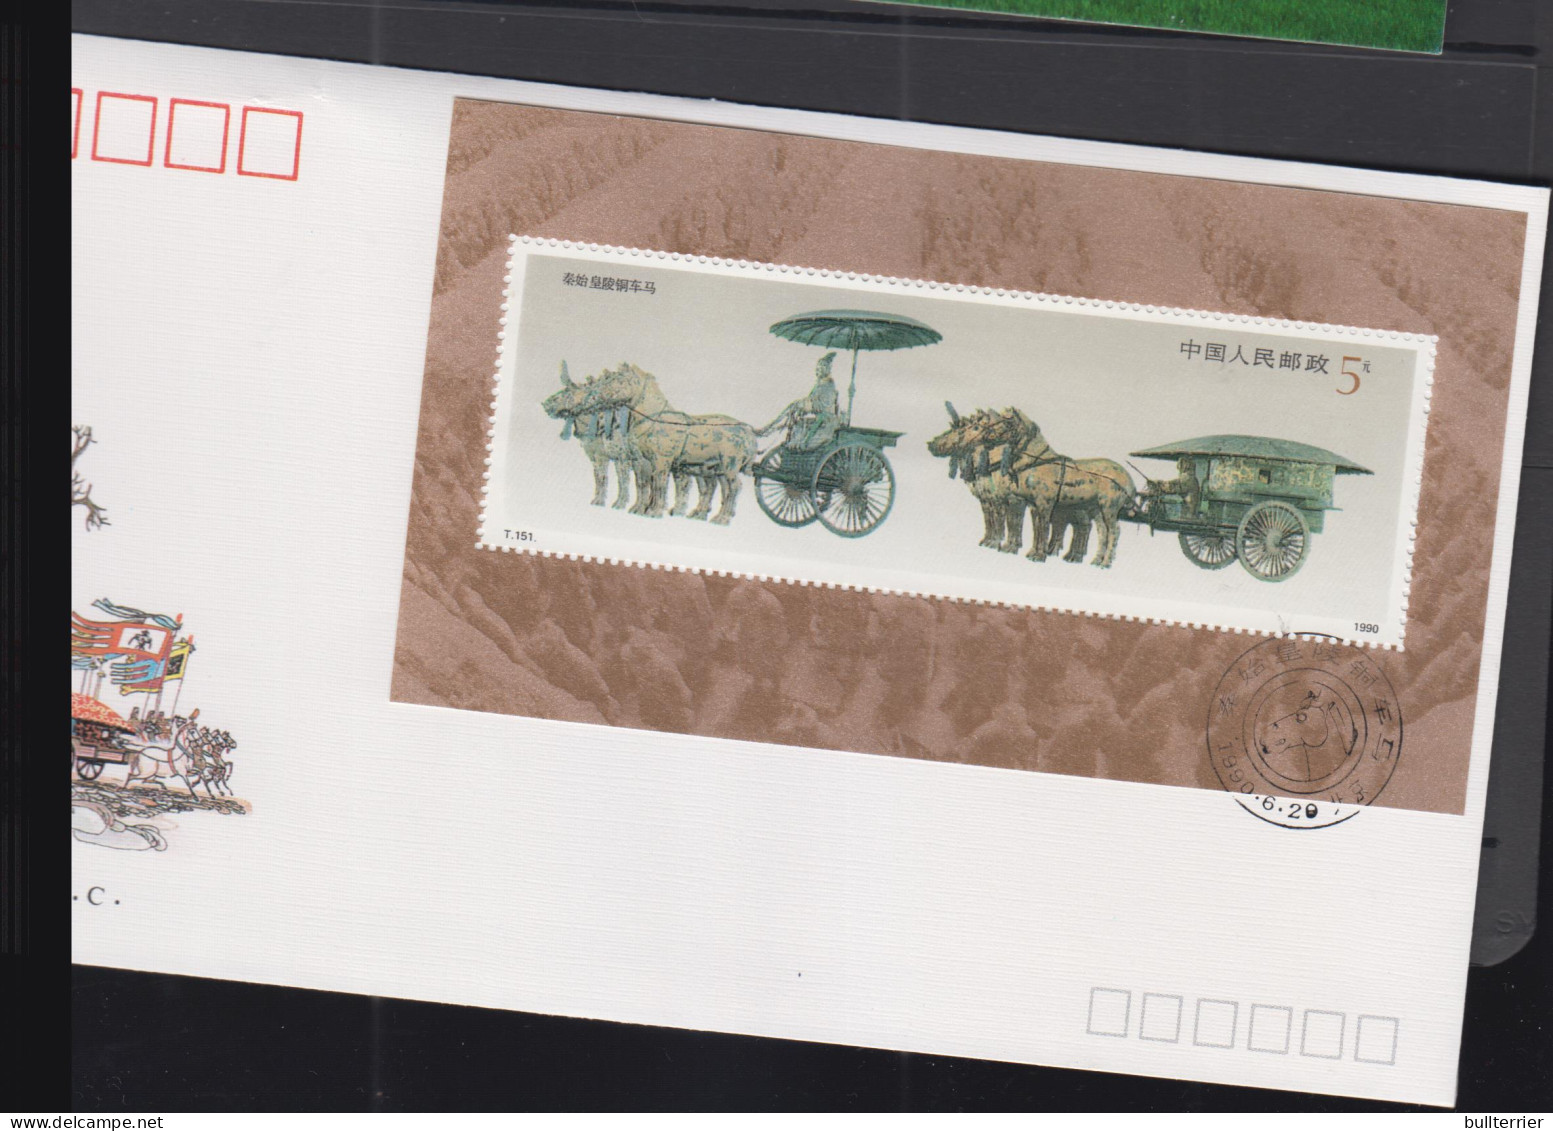 CHINA - 21990 - BRONZE CHARIOT SOUVENIR SHEET ON  ILLUSTRATED FDC  - Covers & Documents